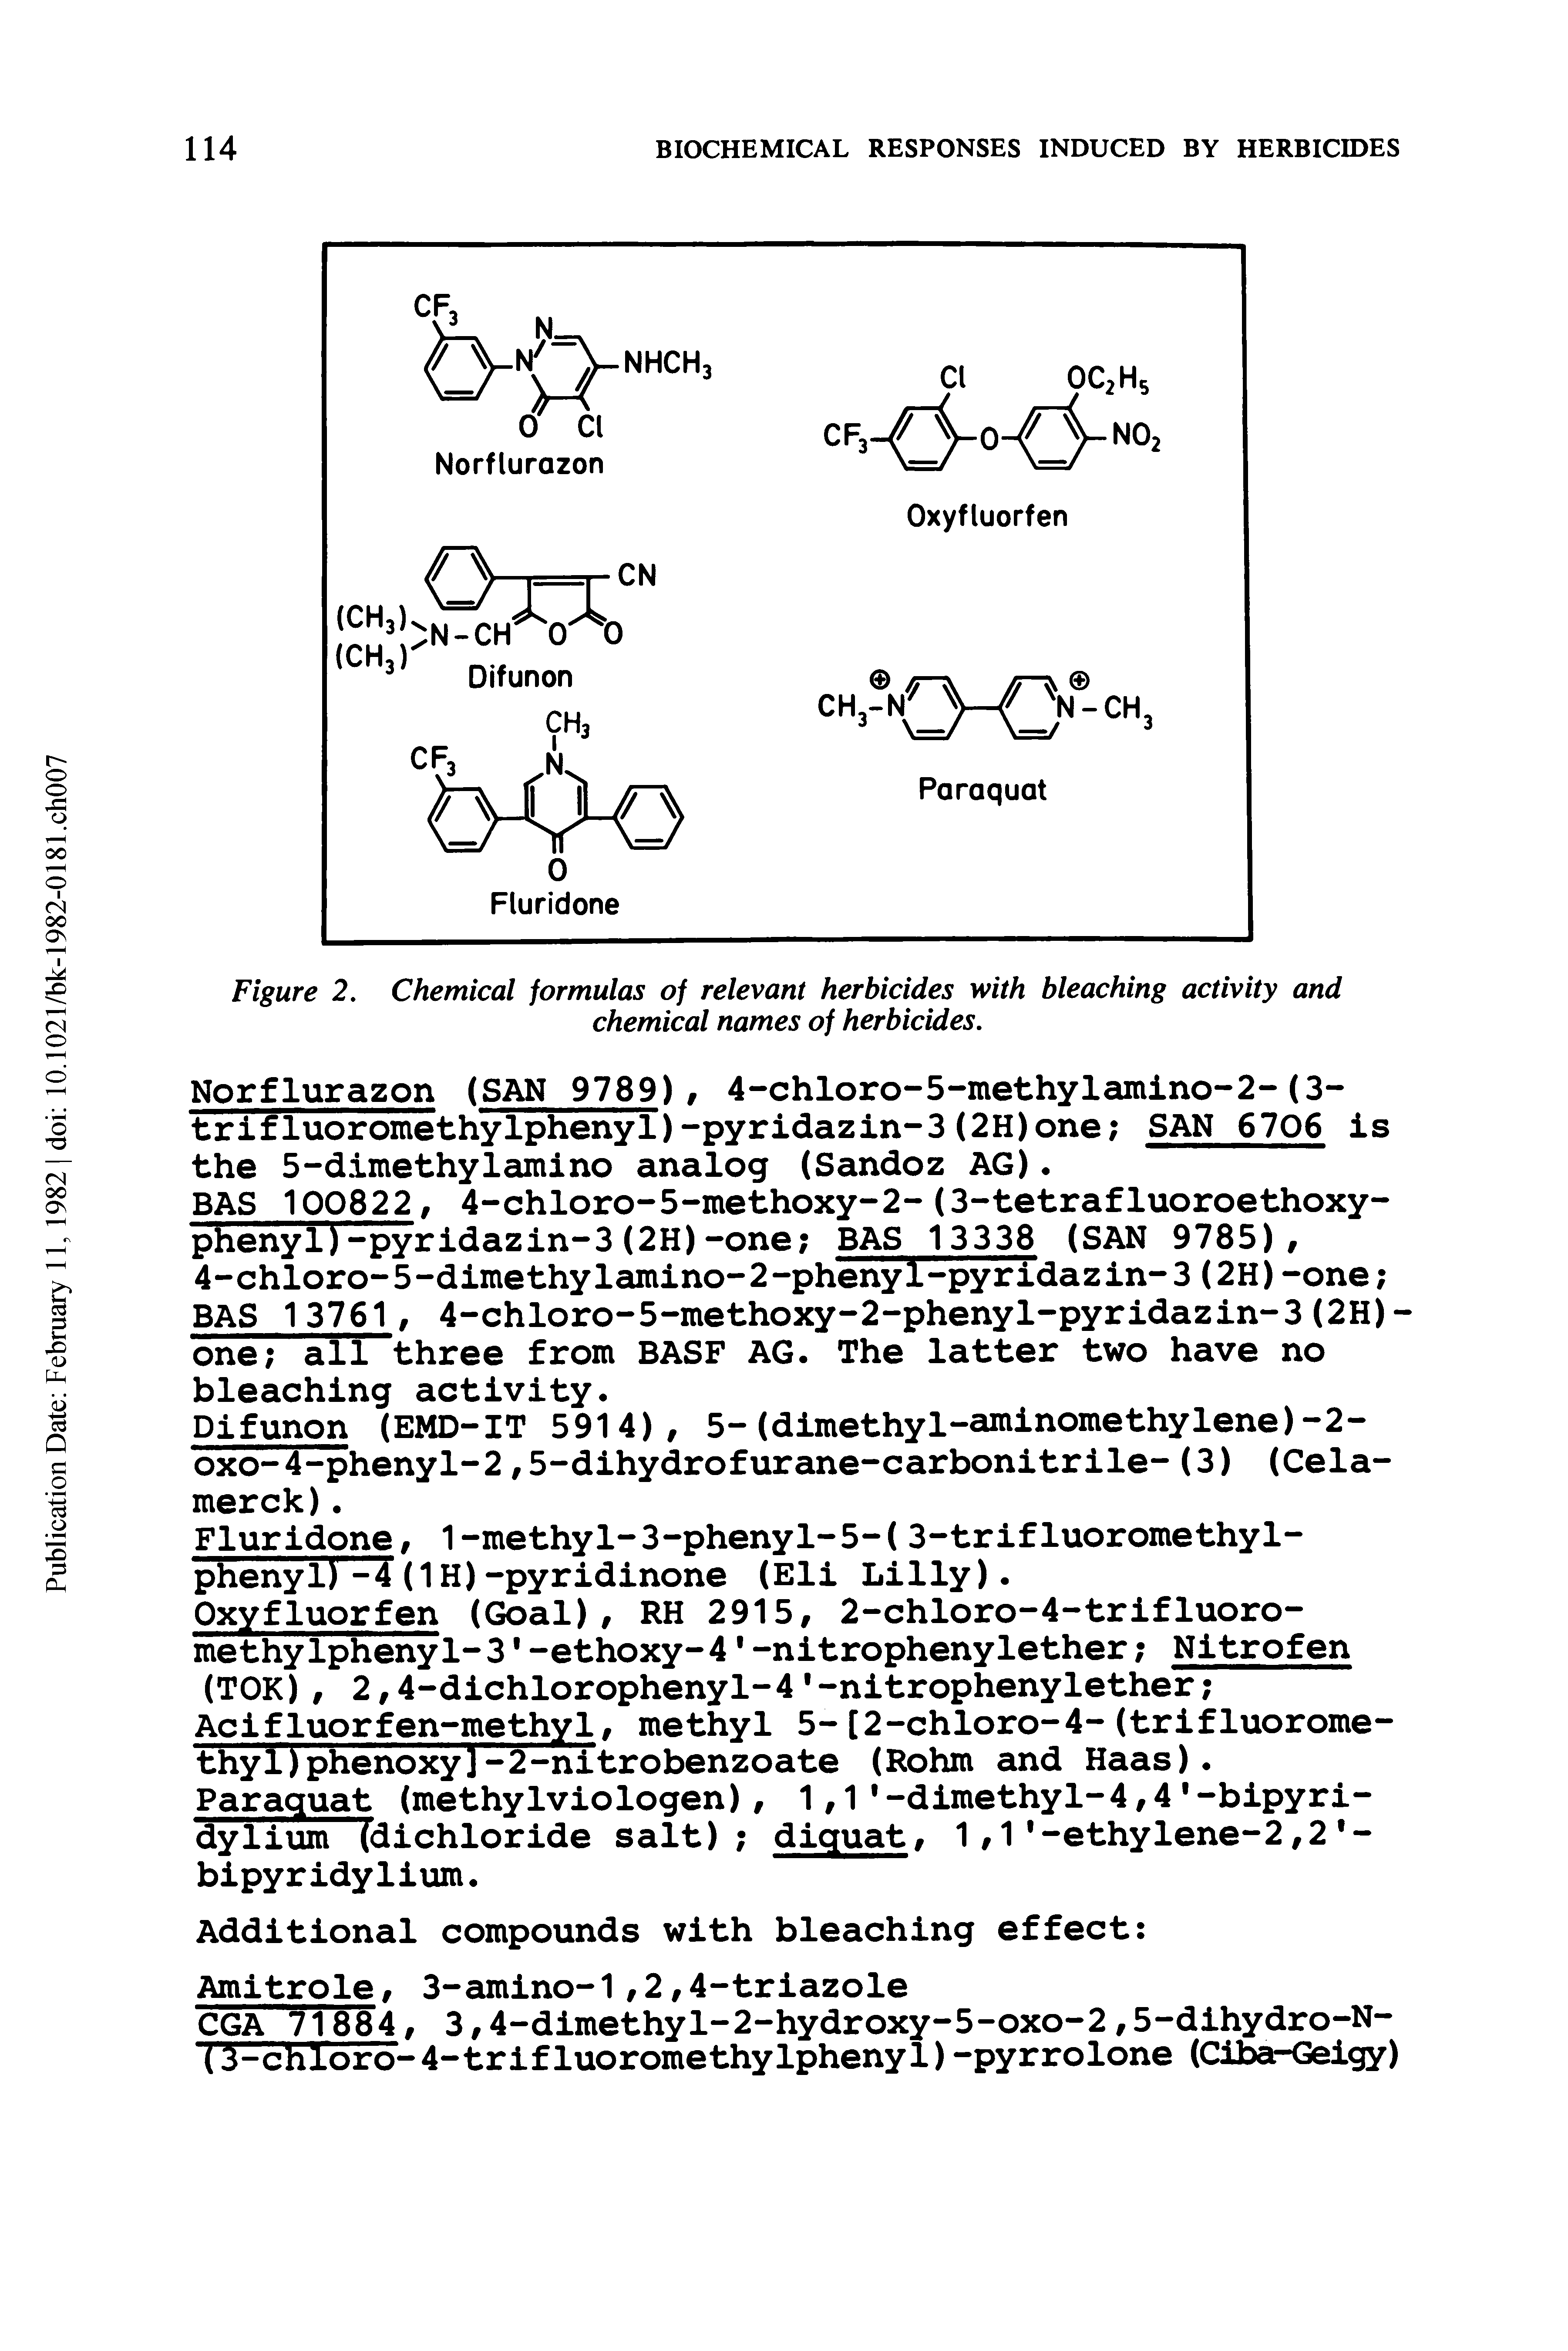 Figure 2. Chemical formulas of relevant herbicides with bleaching activity and chemical names of herbicides.